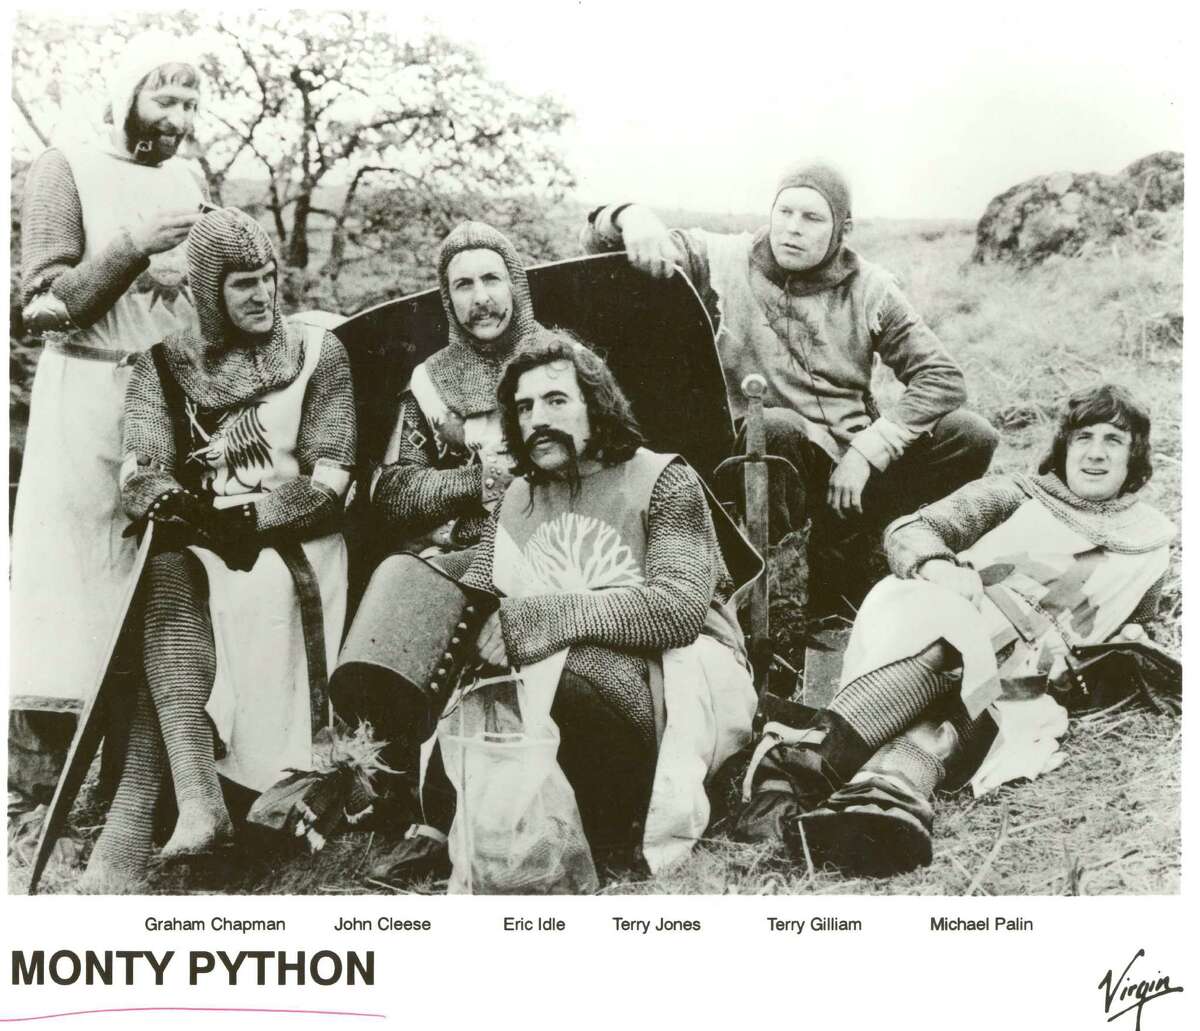 BRITISH COMEDY TROUPE, "MONTY PYTHON". GRAHAM CHAPMAN, JOHN CLEESE, ERIC IDLE, TERRY JONES, TERRY GILLAM, MICHAEL PALIN. from the set of the film MONTY PYTHON AND THE HOLY GRAIL. HOUCHRON CAPTION (01/16/2005) SECZEST: SETTING THE CINEMA BACK 900 YEARS: Graham Chapman, from left, John Cleese, Eric Idle, Terry Jones, Terry Gillam and Michael Palin on the set of the 1975 film Monty Python and the Holy Grail; 2. SPAM!: Hormel has created the limited-edition "golden honey grail" Spam flavor in honor of the musical Monty Python's Spamalot.